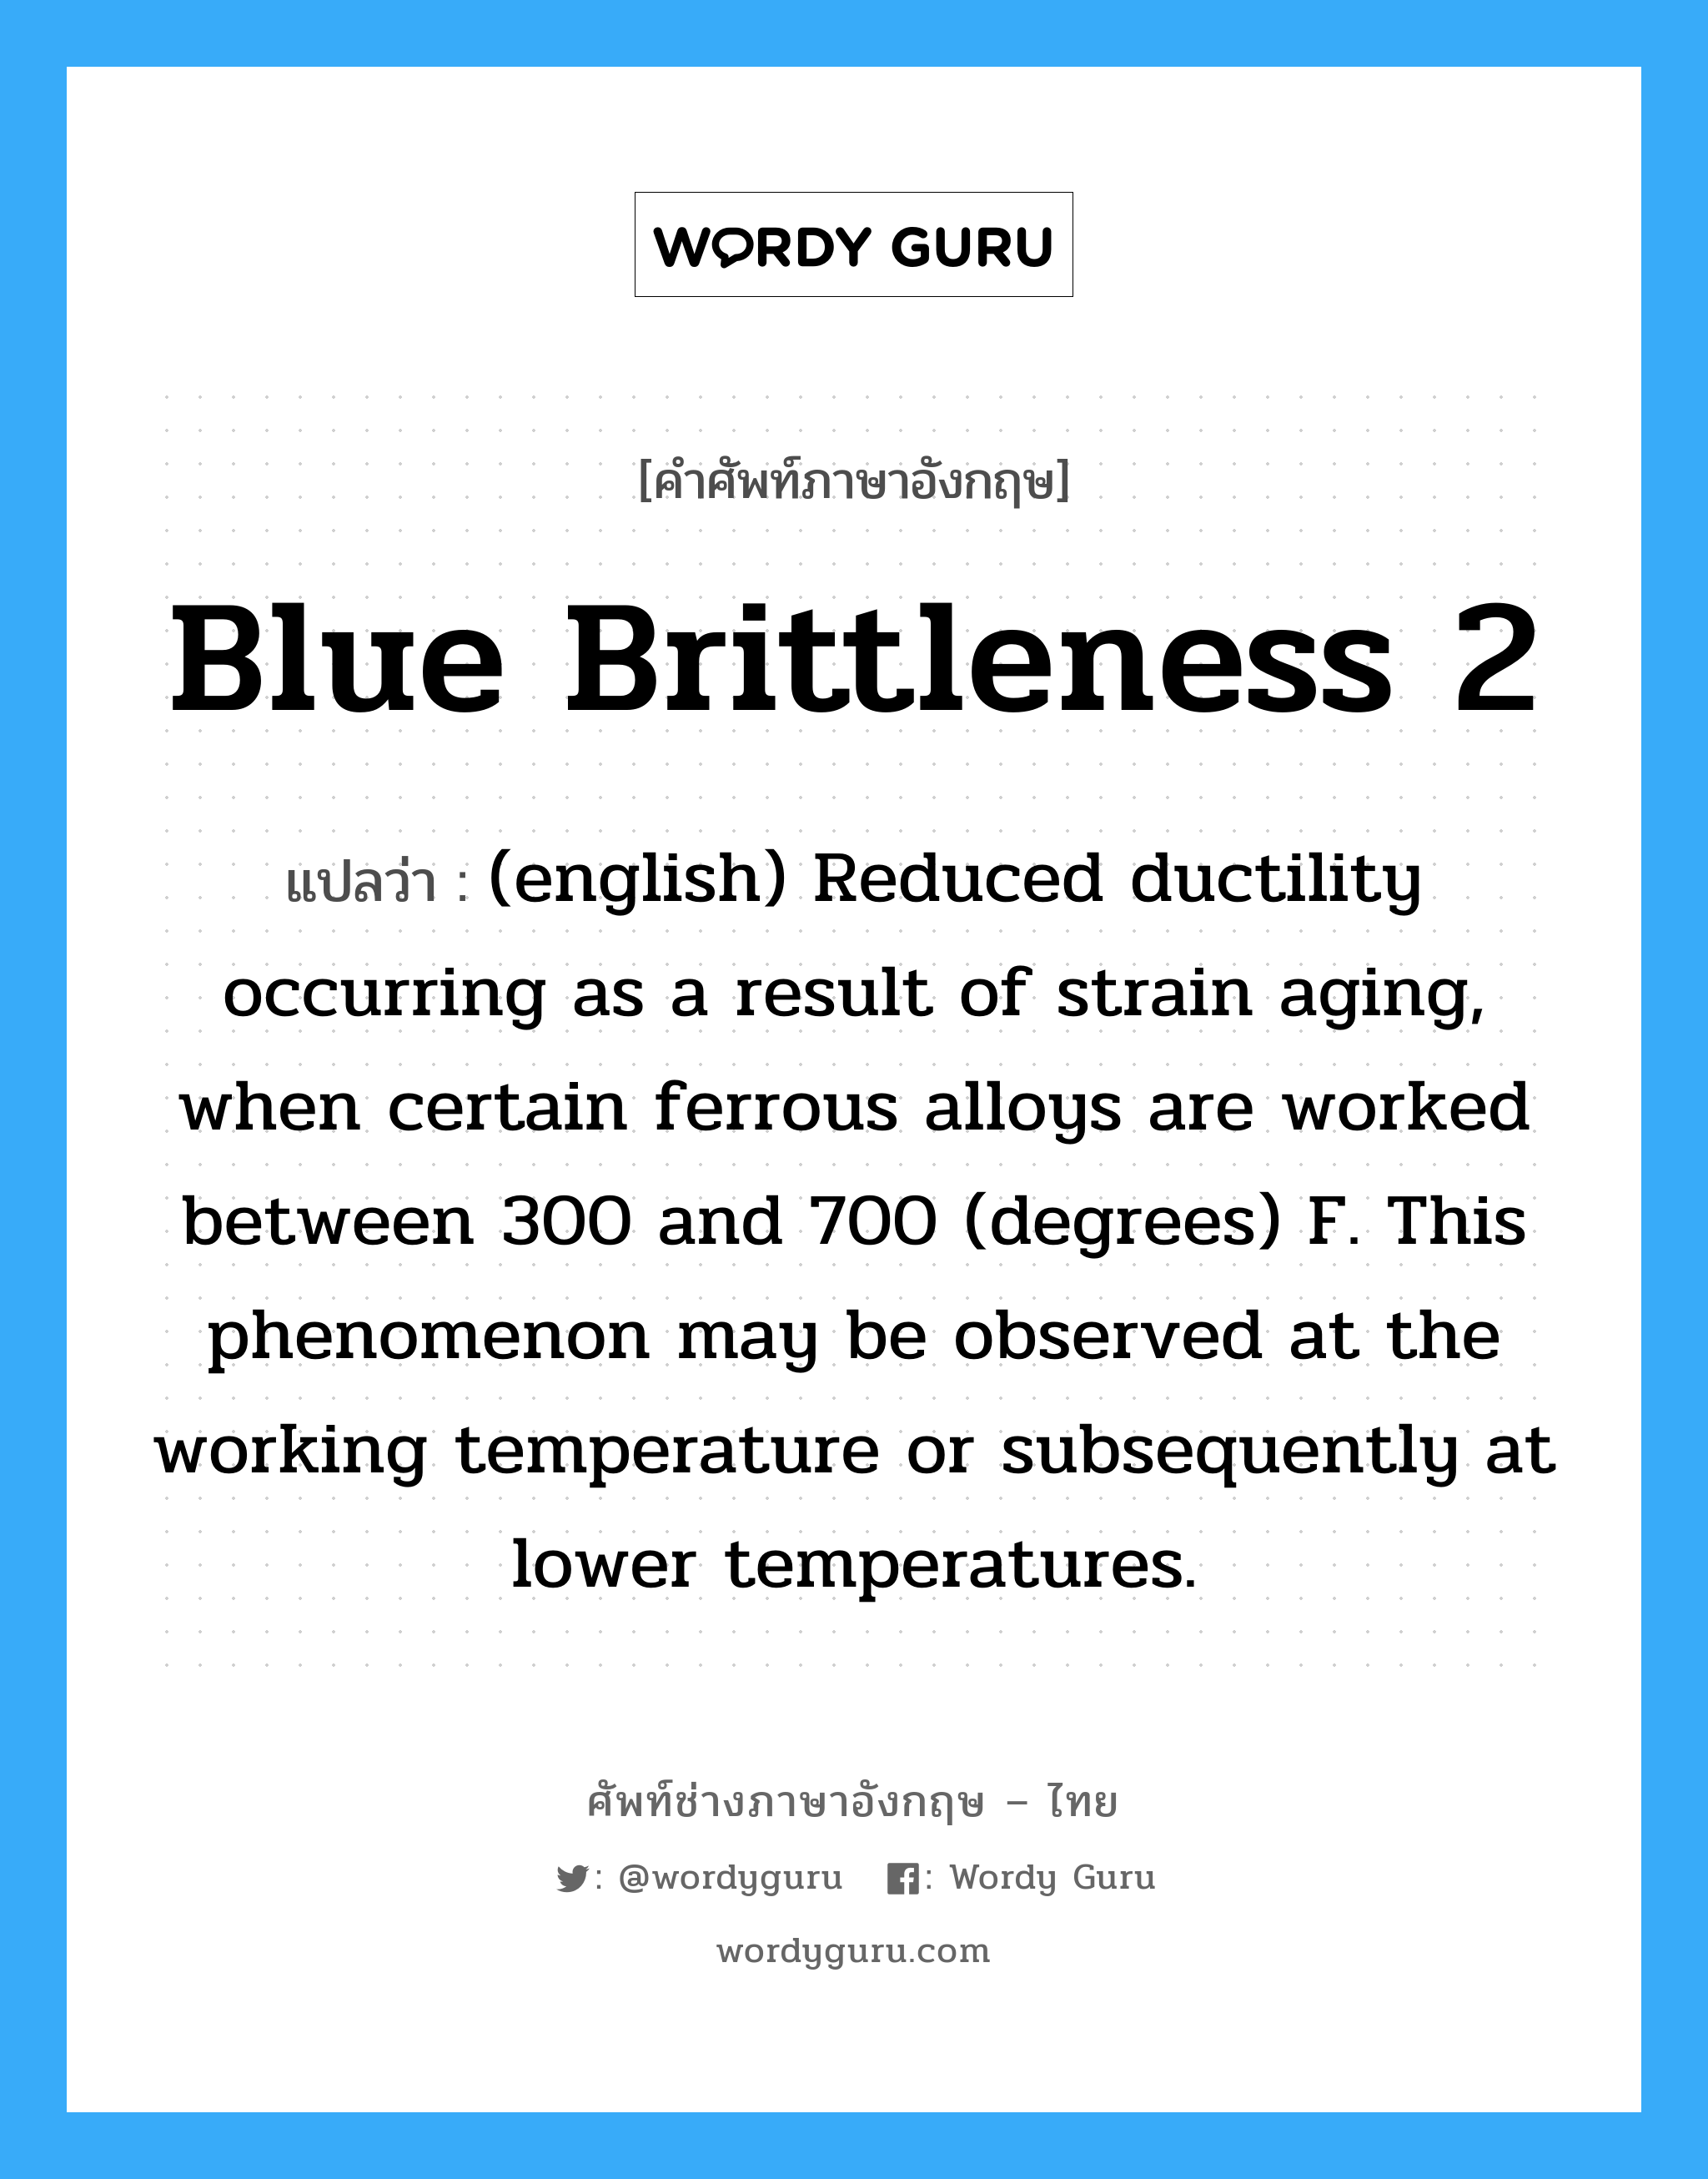 Blue Brittleness 2 แปลว่า?, คำศัพท์ช่างภาษาอังกฤษ - ไทย Blue Brittleness 2 คำศัพท์ภาษาอังกฤษ Blue Brittleness 2 แปลว่า (english) Reduced ductility occurring as a result of strain aging, when certain ferrous alloys are worked between 300 and 700 (degrees) F. This phenomenon may be observed at the working temperature or subsequently at lower temperatures.